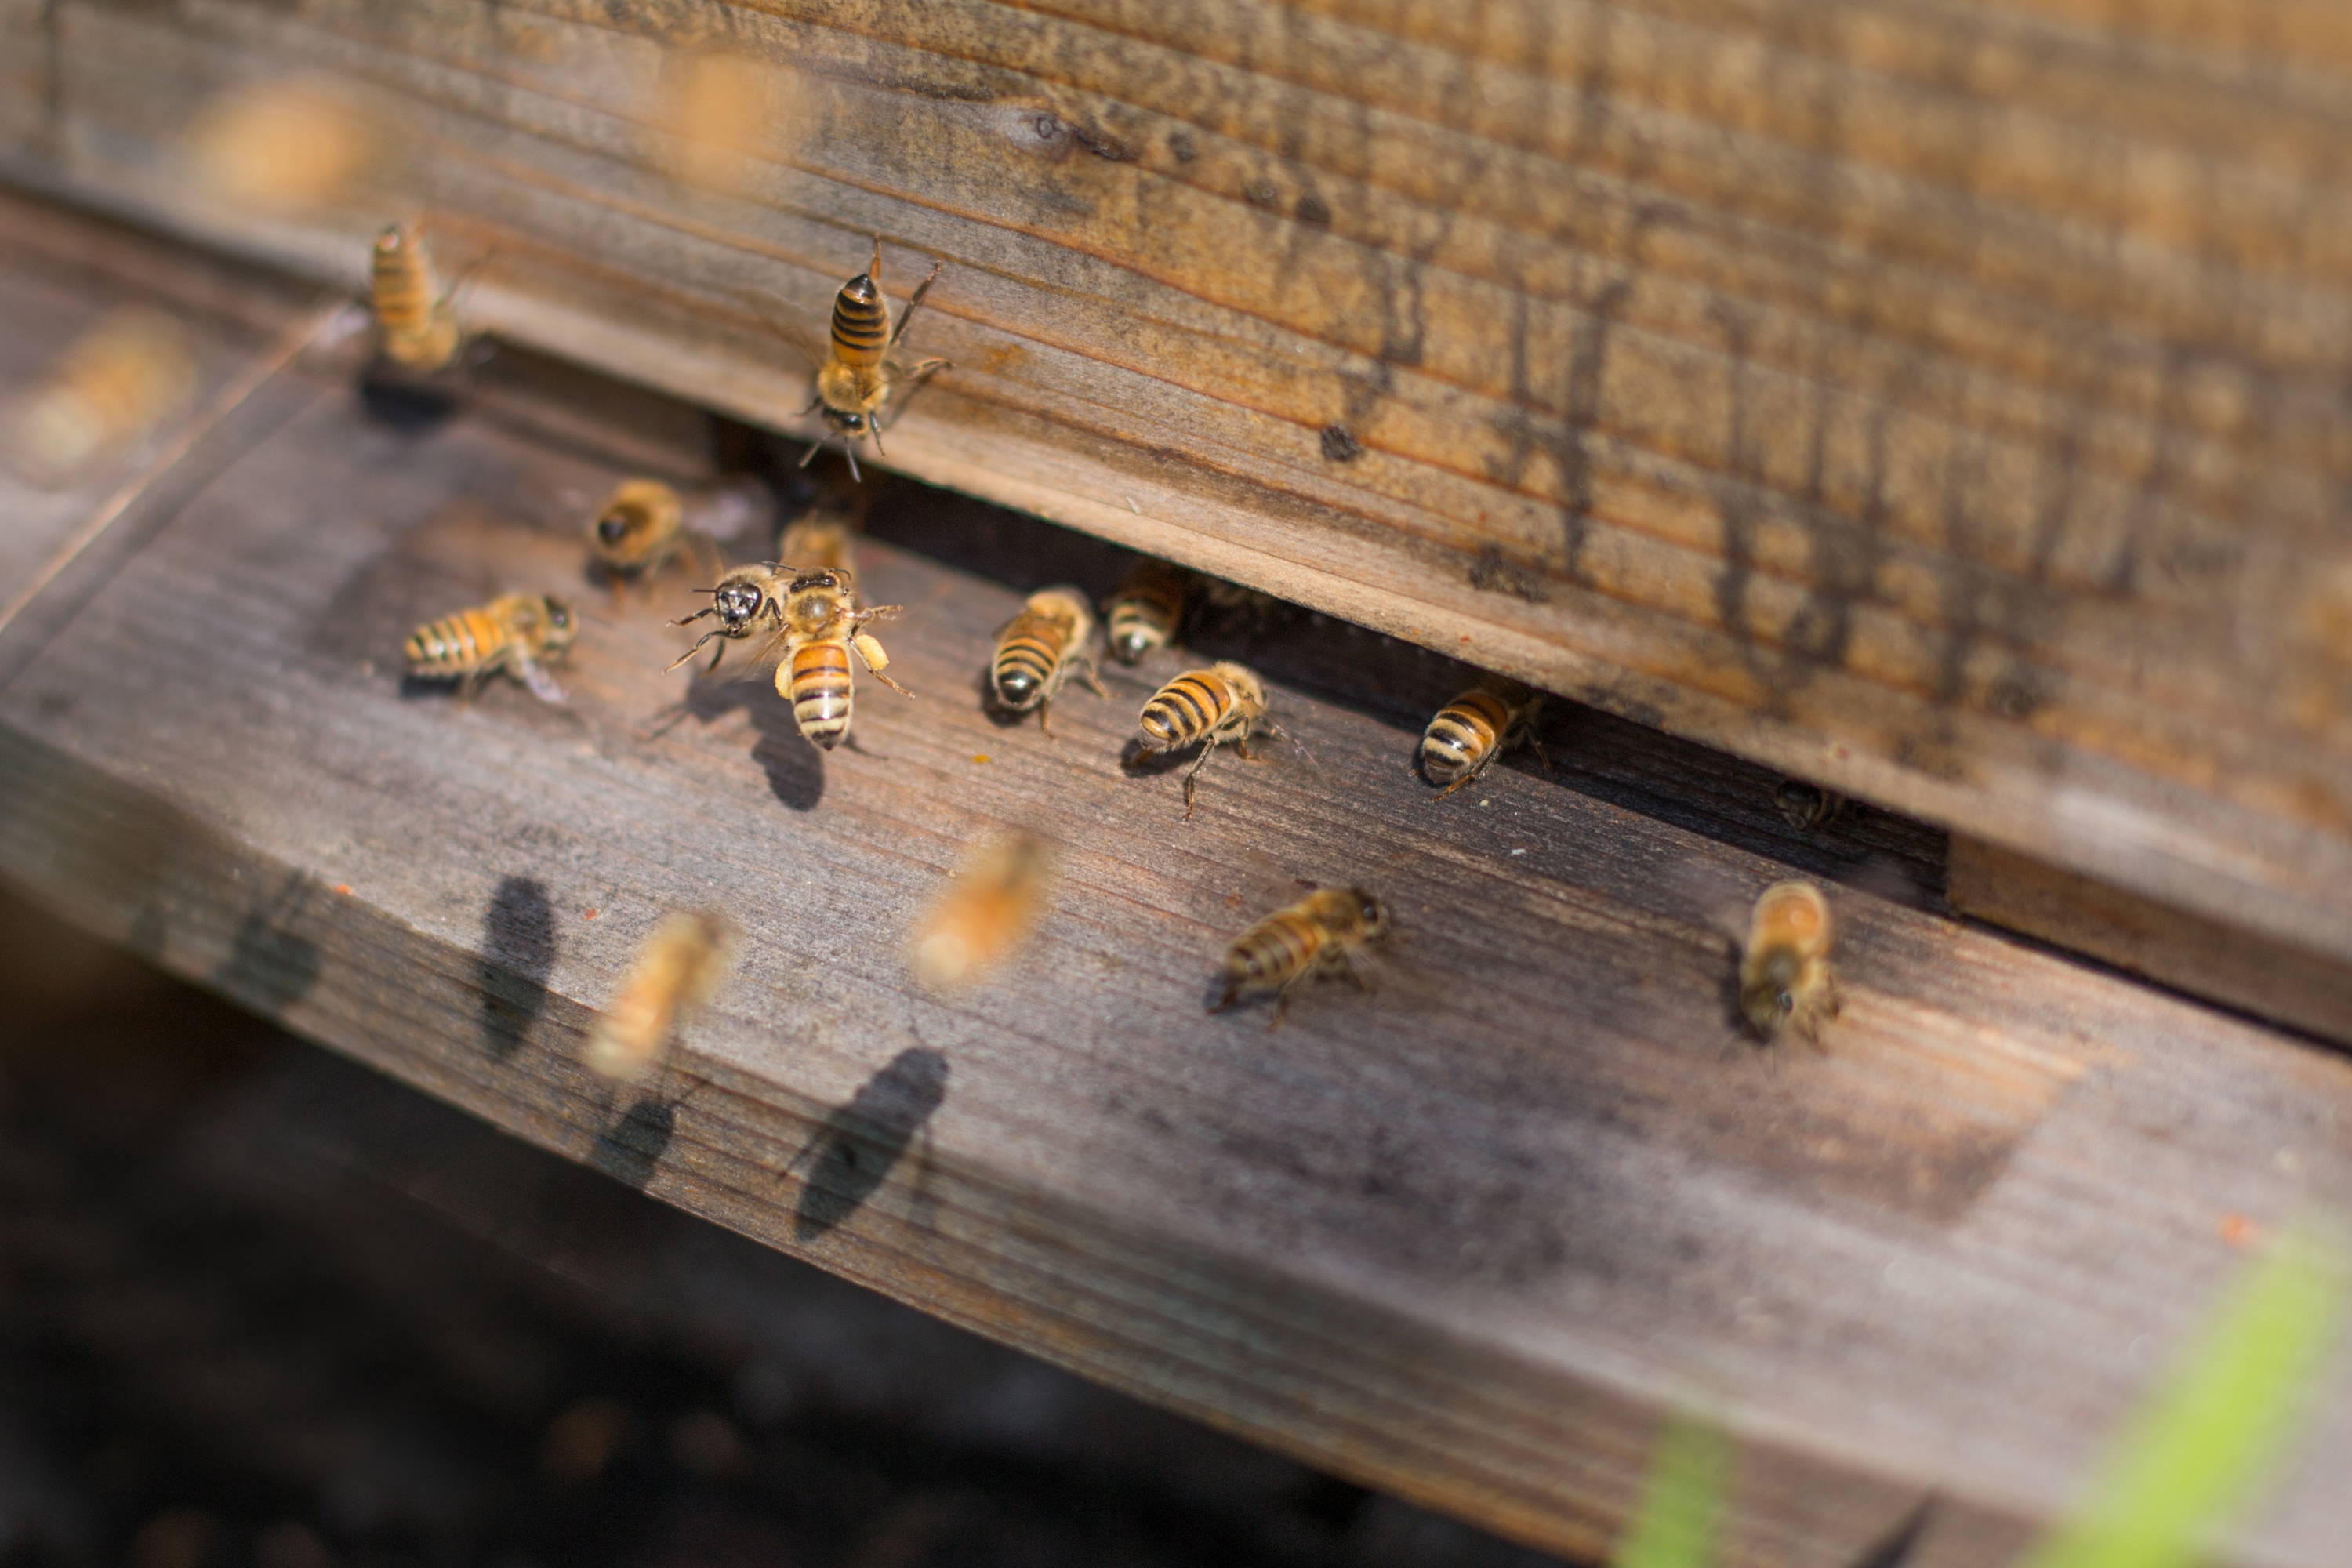 Click to learn more about buying your first hive